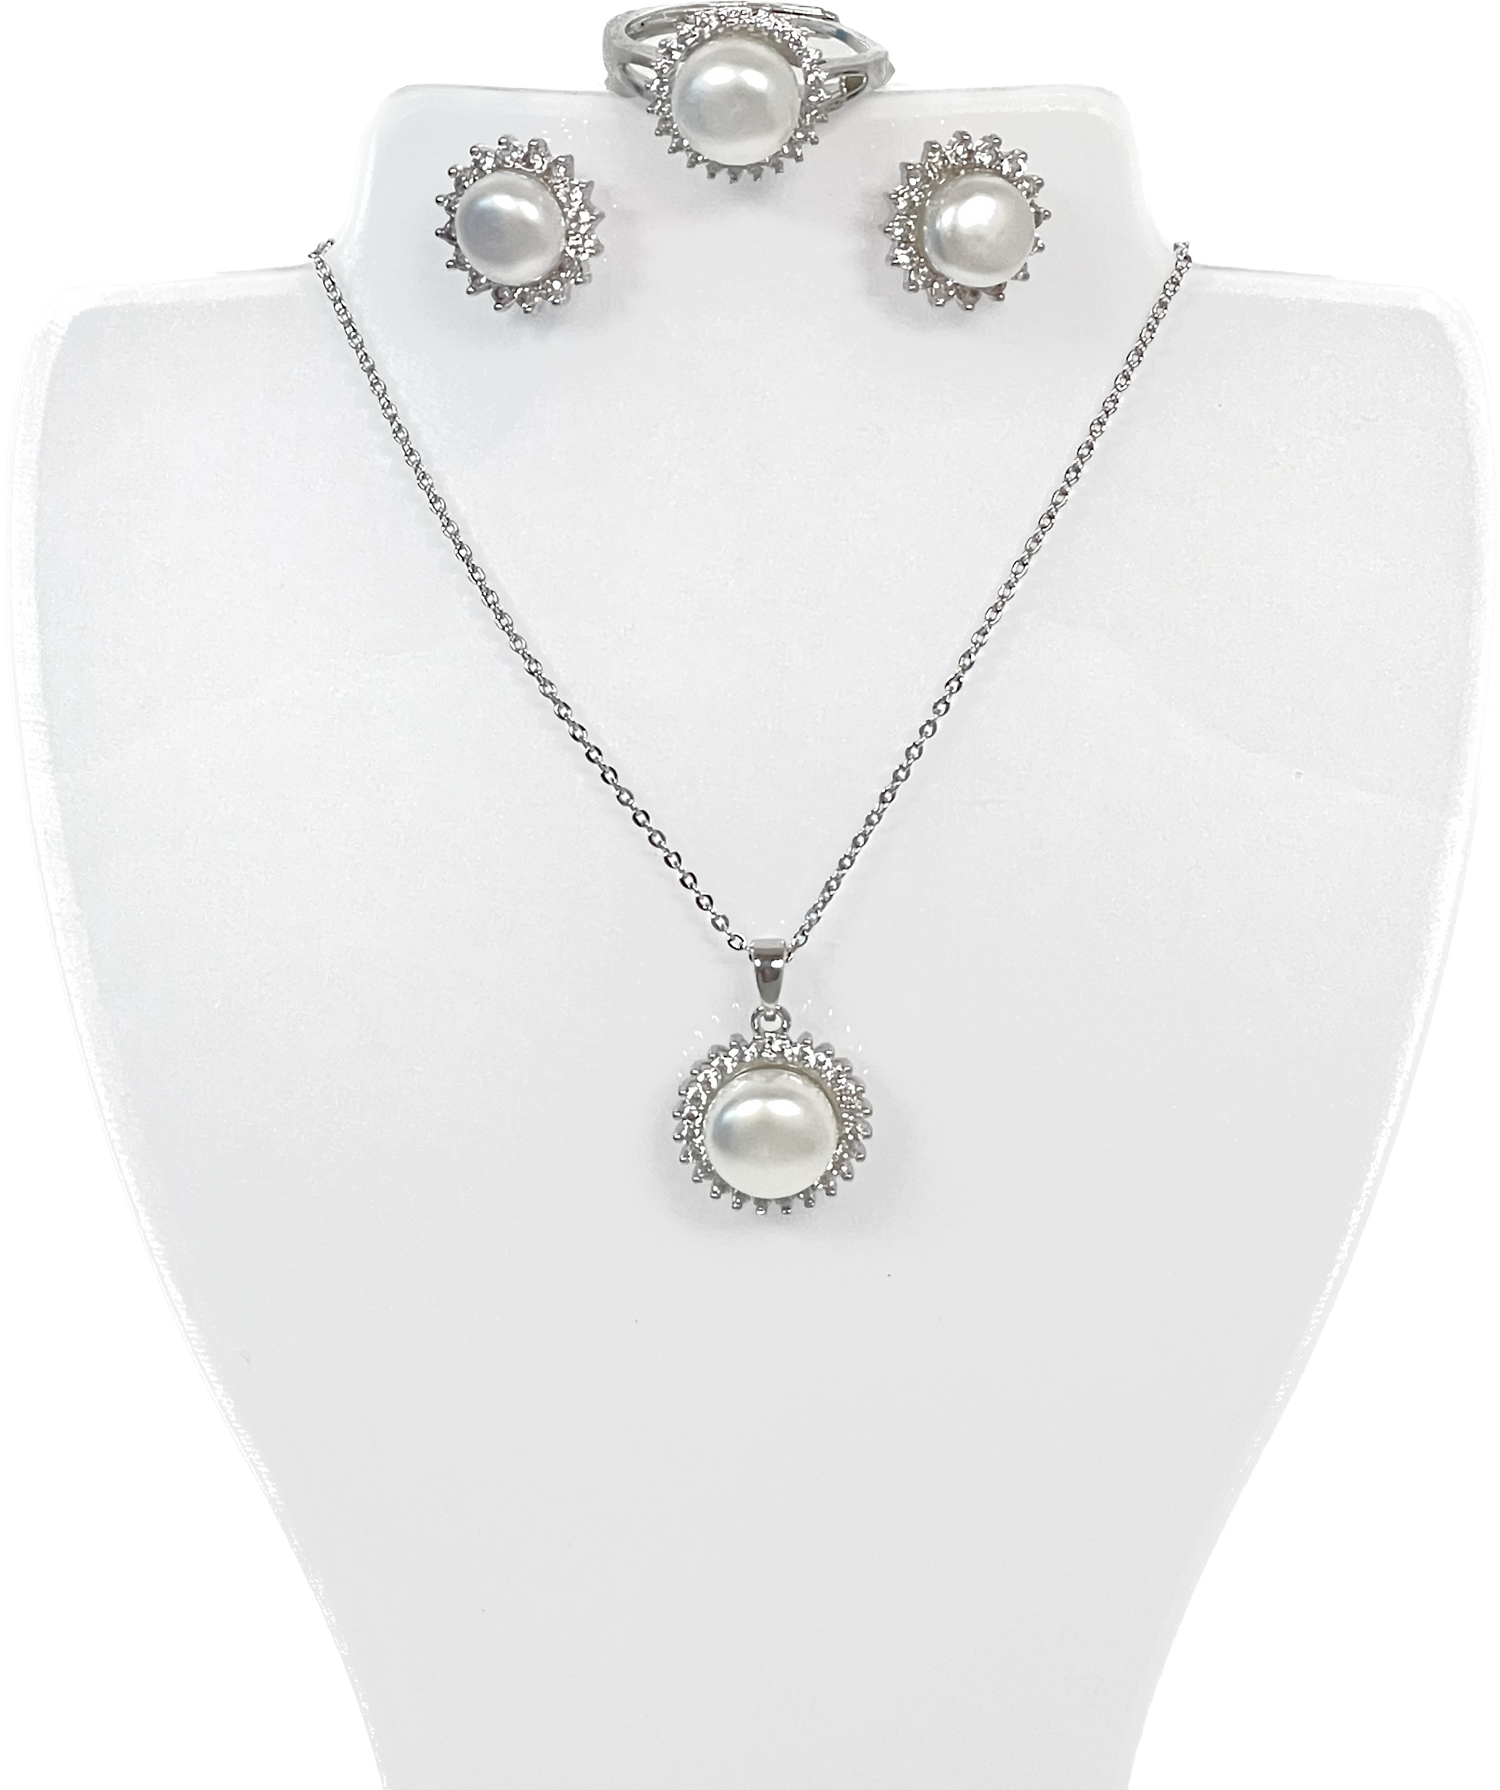 Plated Freshwater Pearl Full Jewelry Set with .925 Earring Posts